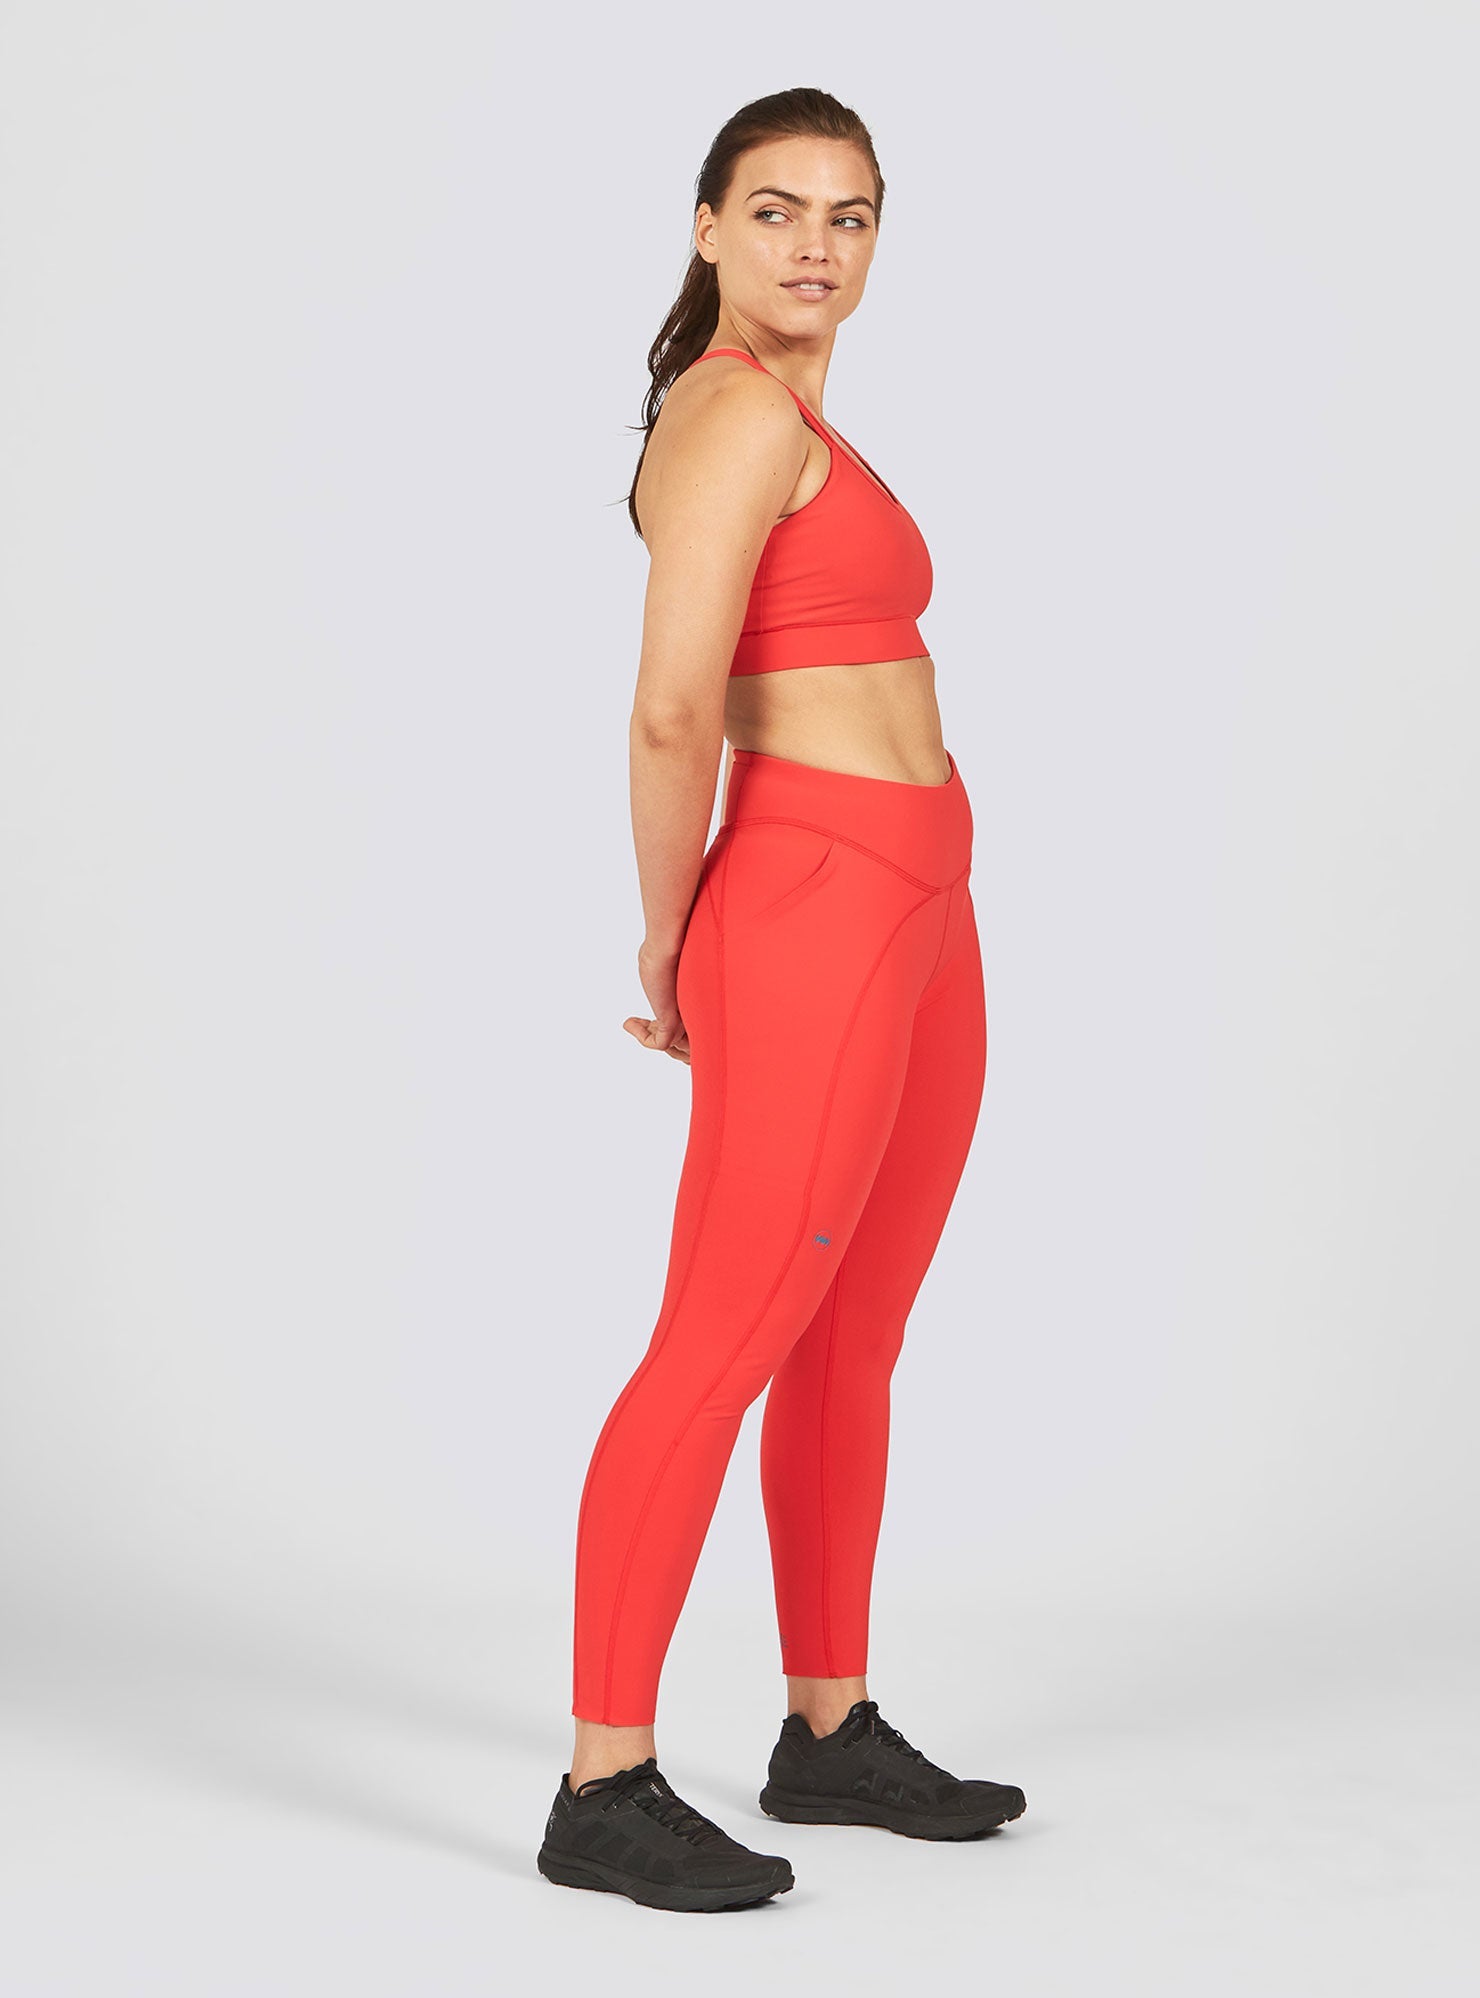 What is 3/4 Stretchy Peony Red Capri Pants for Women Running